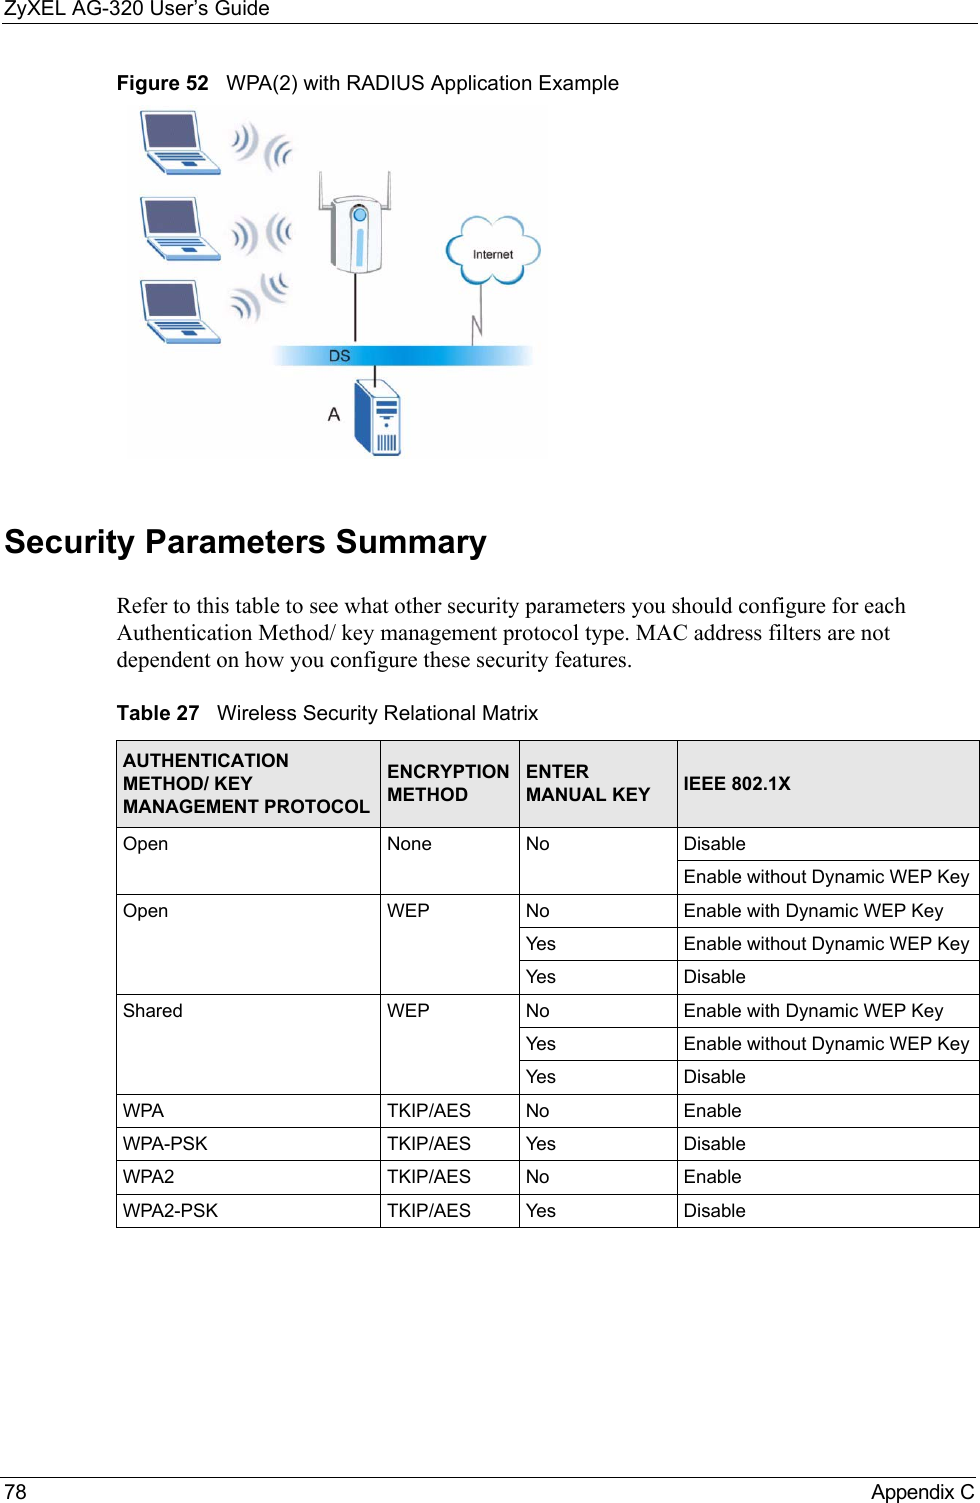 ZyXEL AG-320 User’s Guide78 Appendix CFigure 52   WPA(2) with RADIUS Application ExampleSecurity Parameters SummaryRefer to this table to see what other security parameters you should configure for each Authentication Method/ key management protocol type. MAC address filters are not dependent on how you configure these security features.Table 27   Wireless Security Relational MatrixAUTHENTICATION METHOD/ KEY MANAGEMENT PROTOCOLENCRYPTION METHODENTER MANUAL KEY IEEE 802.1XOpen None No DisableEnable without Dynamic WEP KeyOpen WEP No           Enable with Dynamic WEP KeyYes Enable without Dynamic WEP KeyYes DisableShared WEP  No           Enable with Dynamic WEP KeyYes Enable without Dynamic WEP KeyYes DisableWPA  TKIP/AES No EnableWPA-PSK  TKIP/AES Yes DisableWPA2 TKIP/AES No EnableWPA2-PSK  TKIP/AES Yes Disable